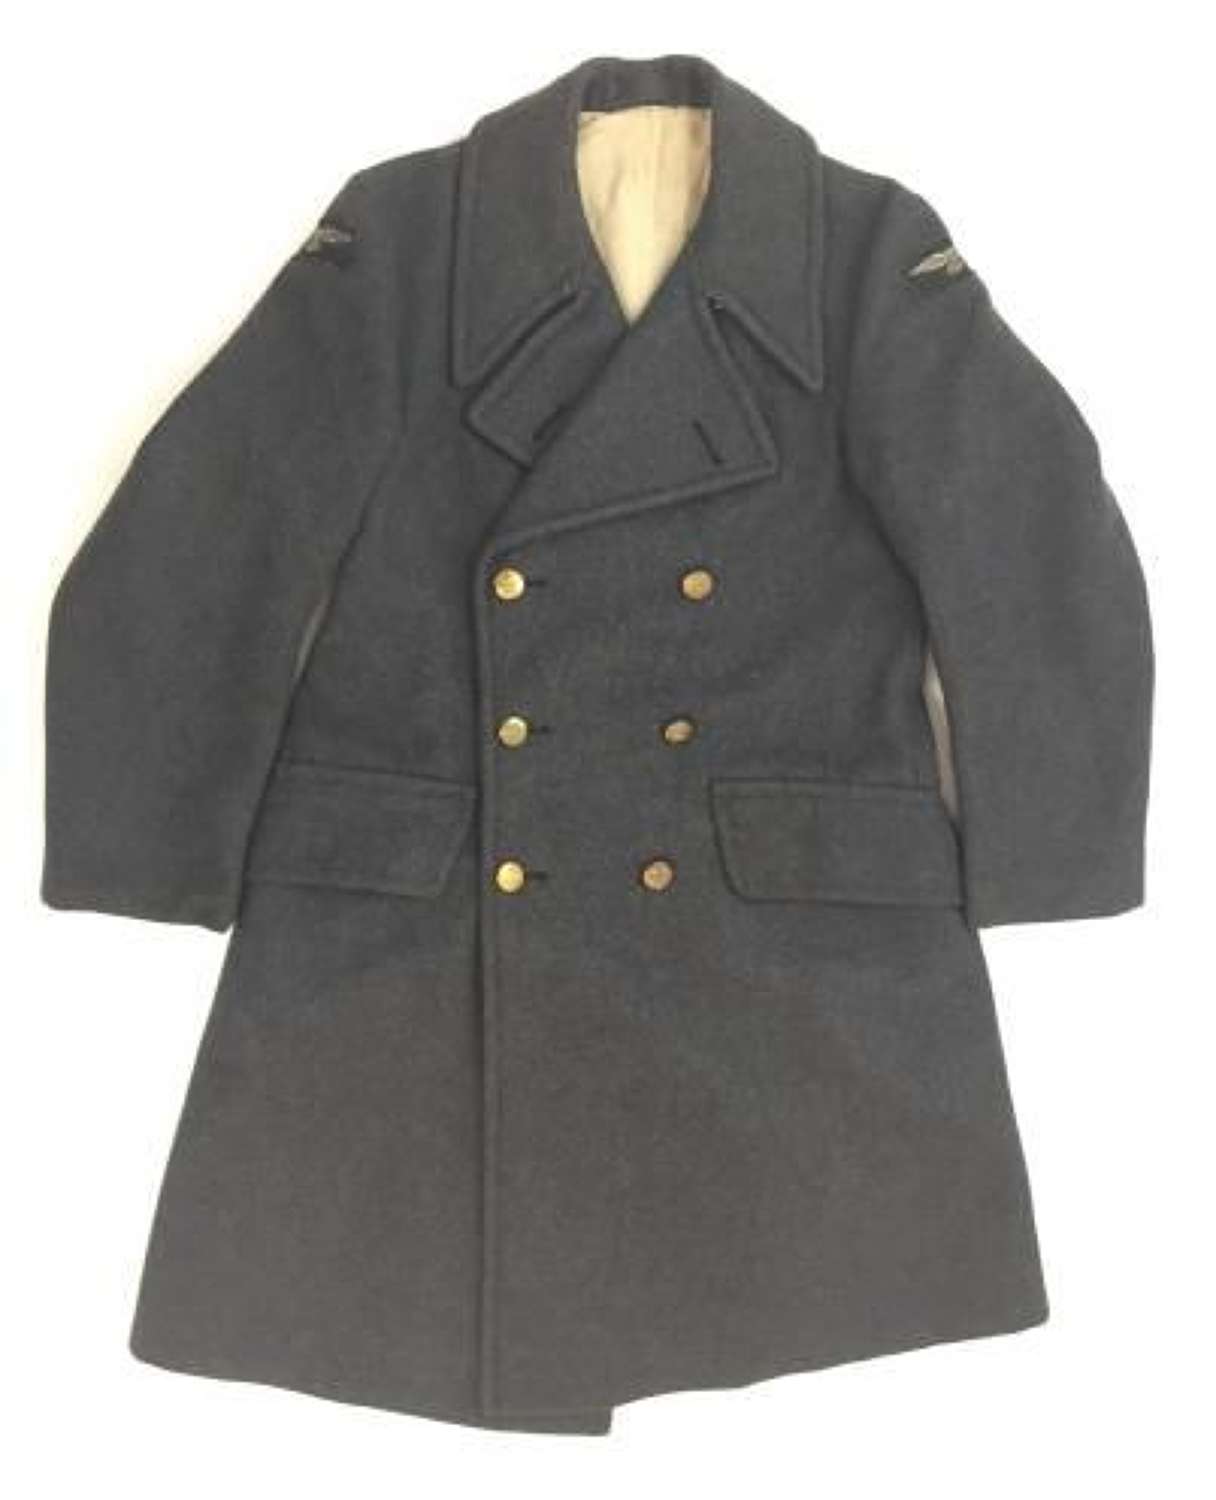 Original 1948 Dated RAF Ordinary Airman's Greatcoat - Size 2